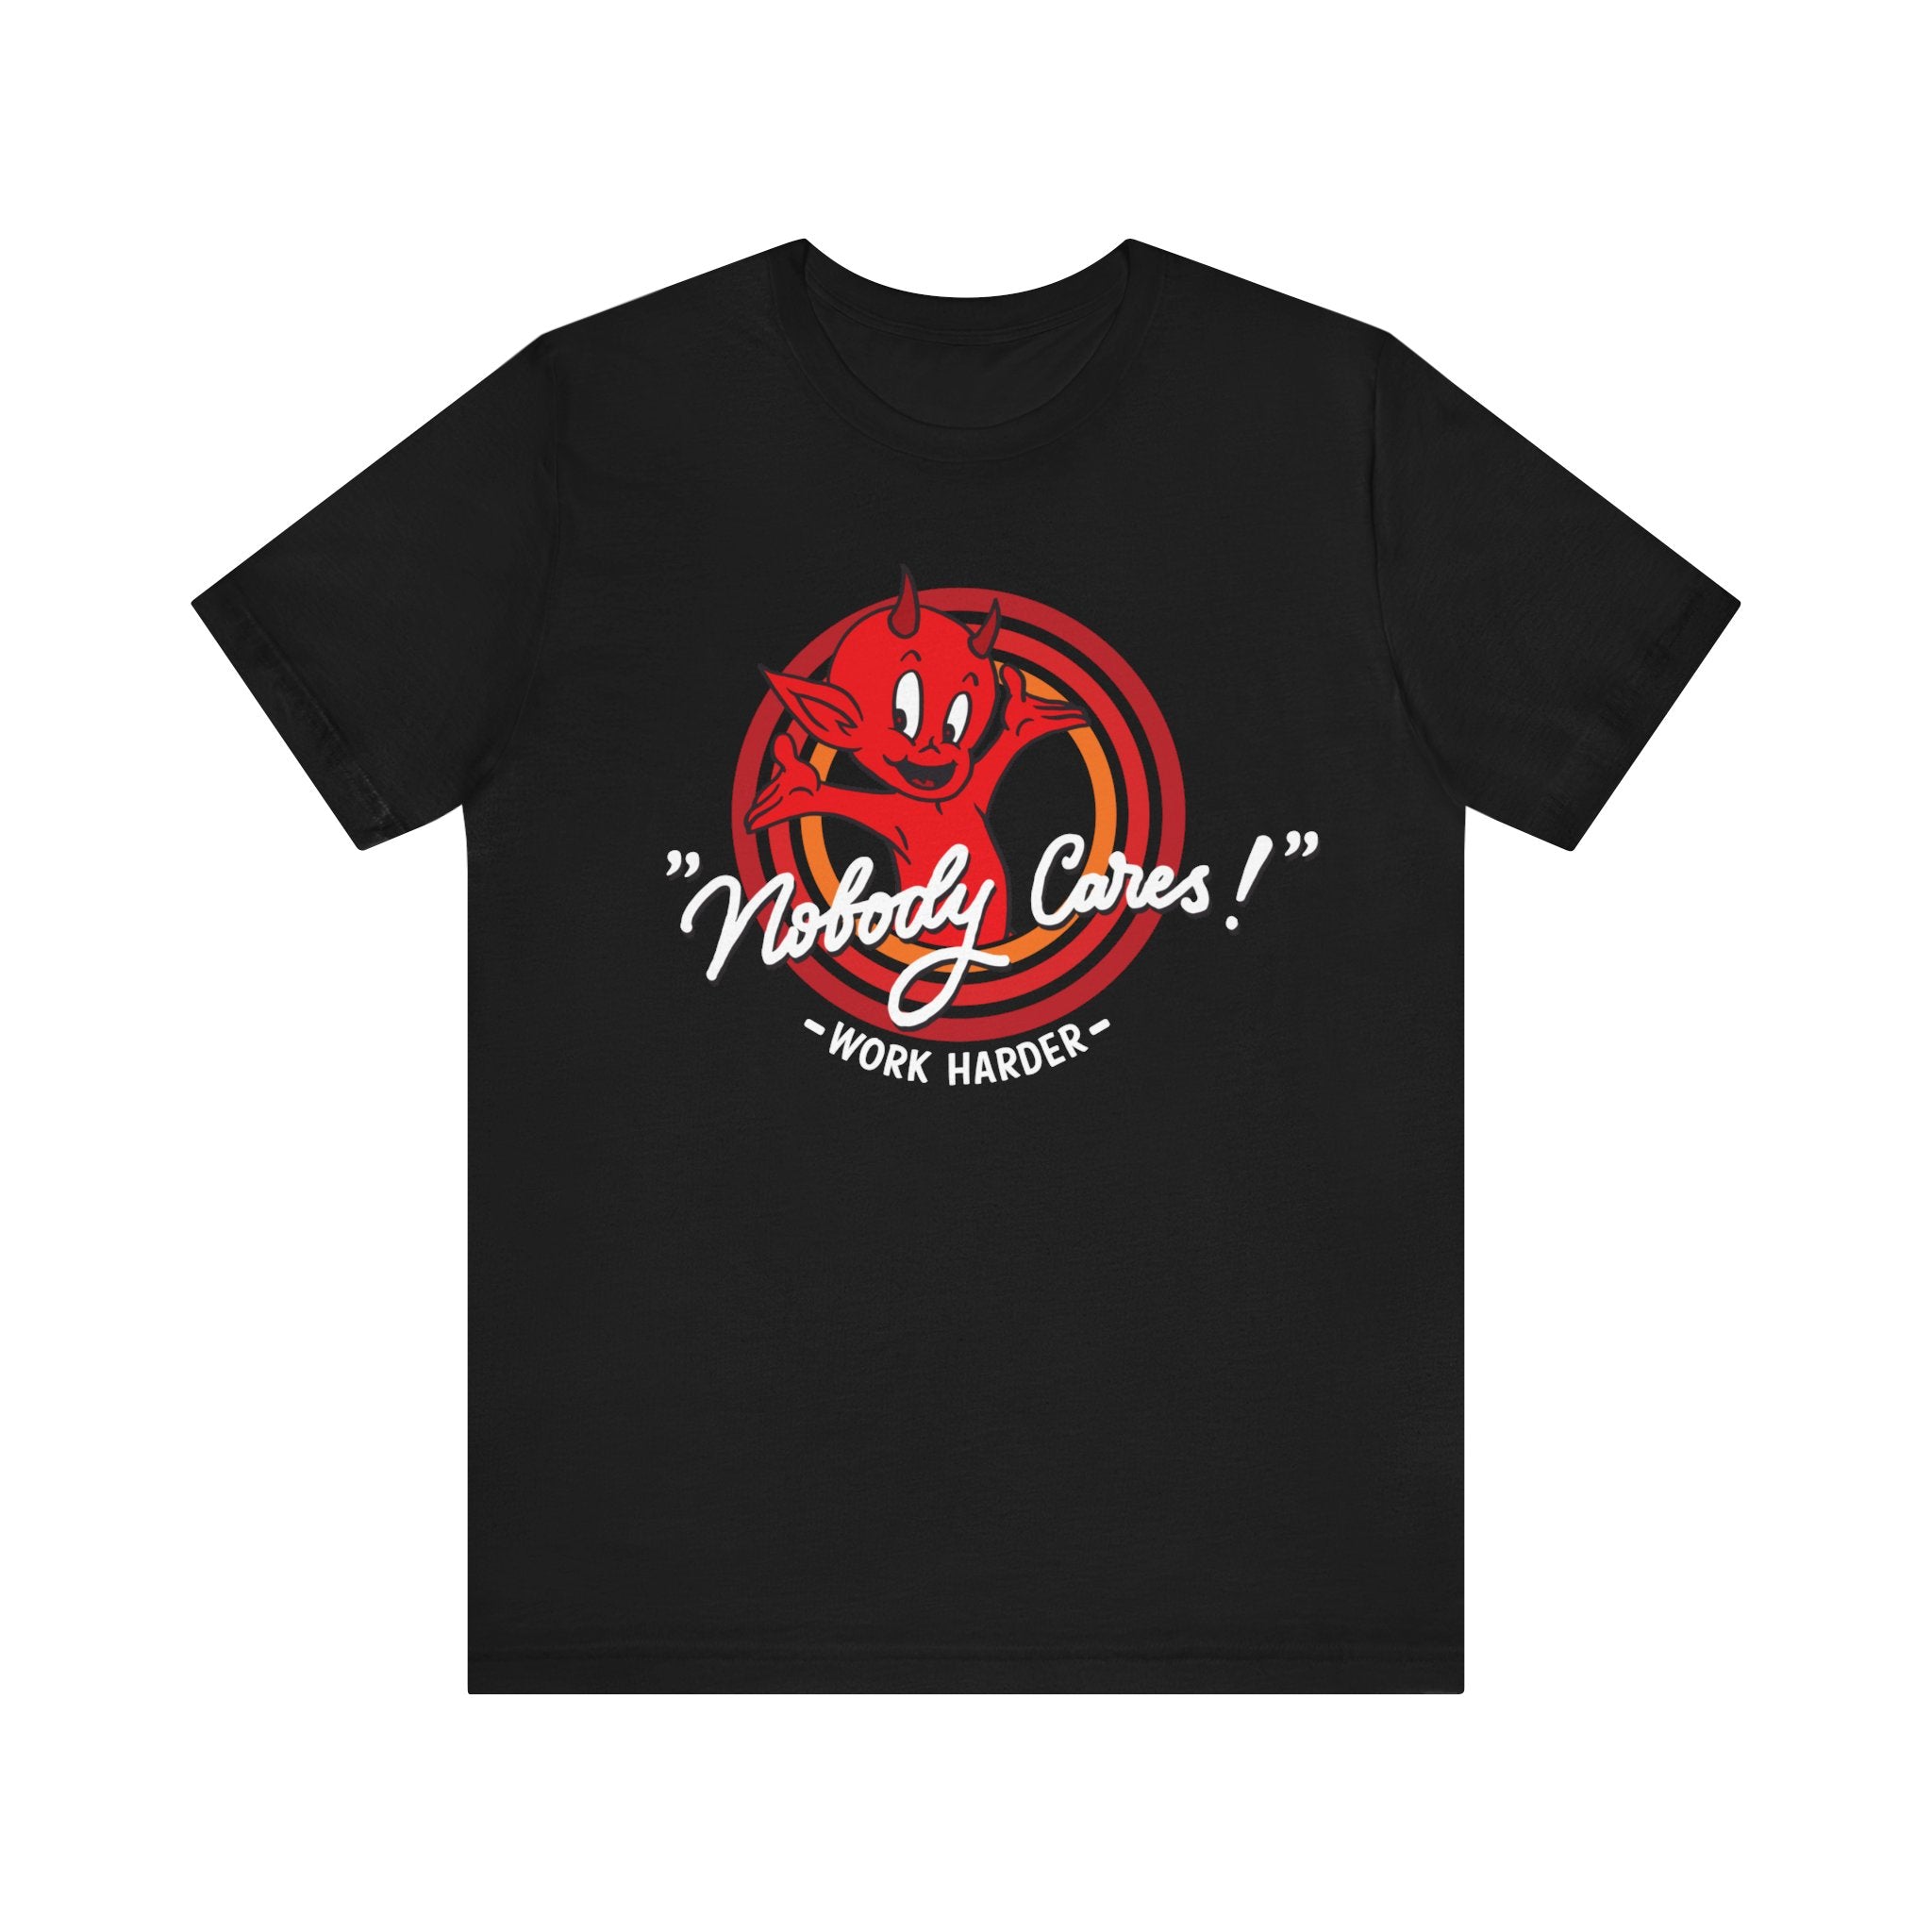 Black t-shirt featuring a quality print of a red devil graphic and the phrase "Nobody Cares" in white text.